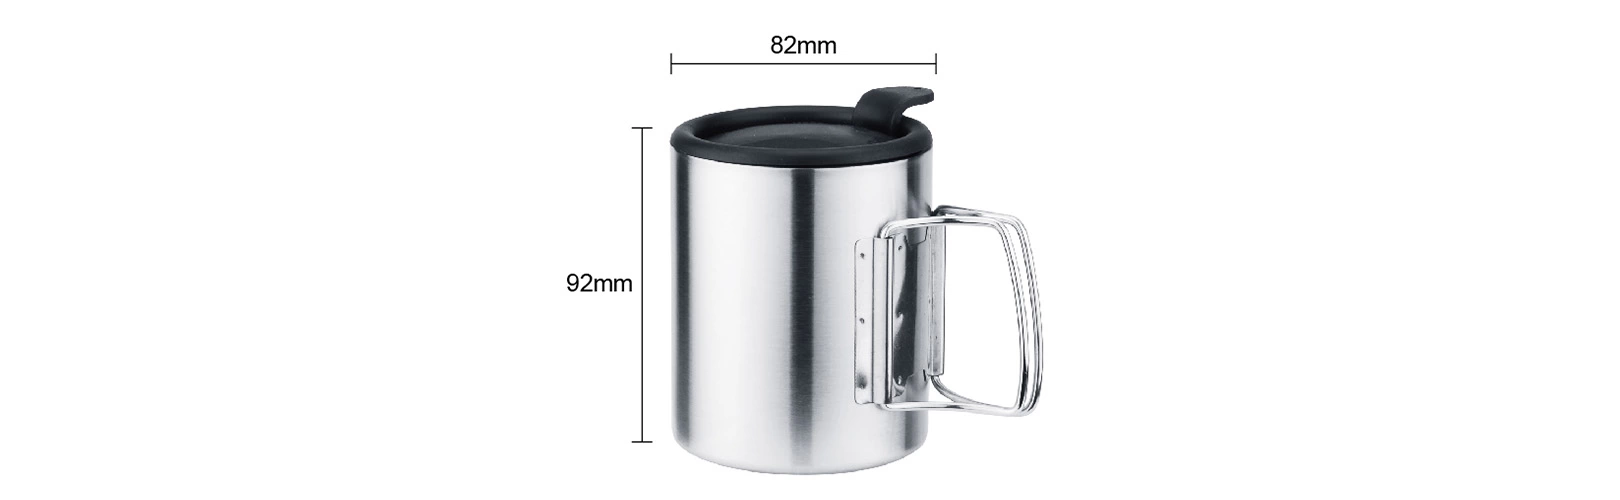 details of Stainless Steel Portable Cup for Camping Use